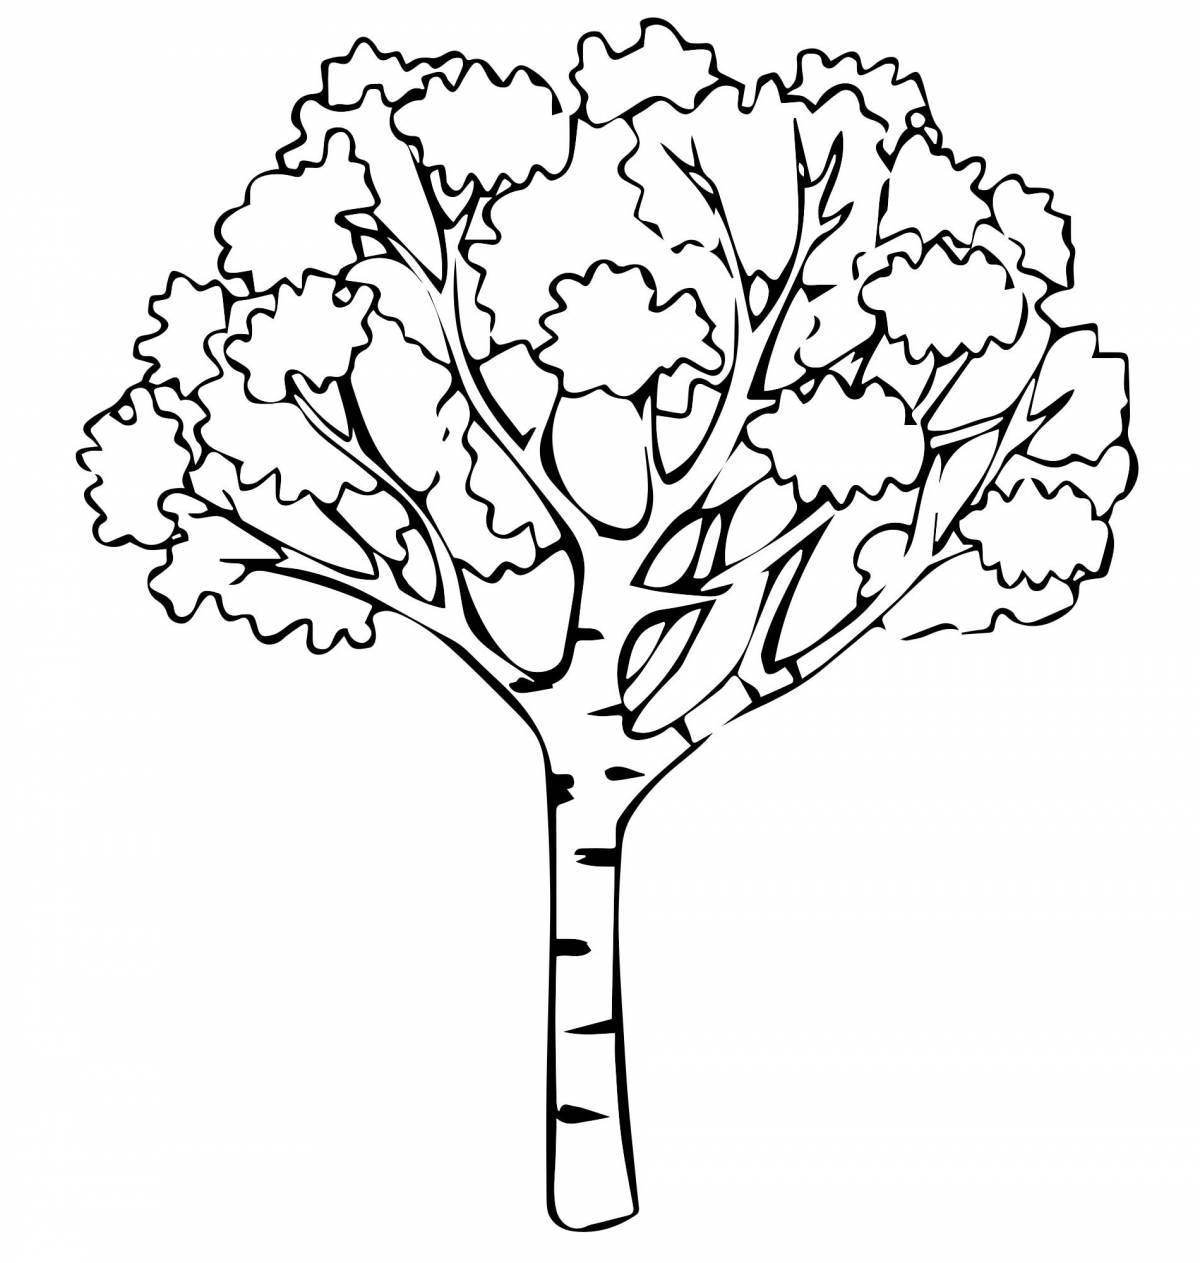 Coloring majestic tree for children 6-7 years old